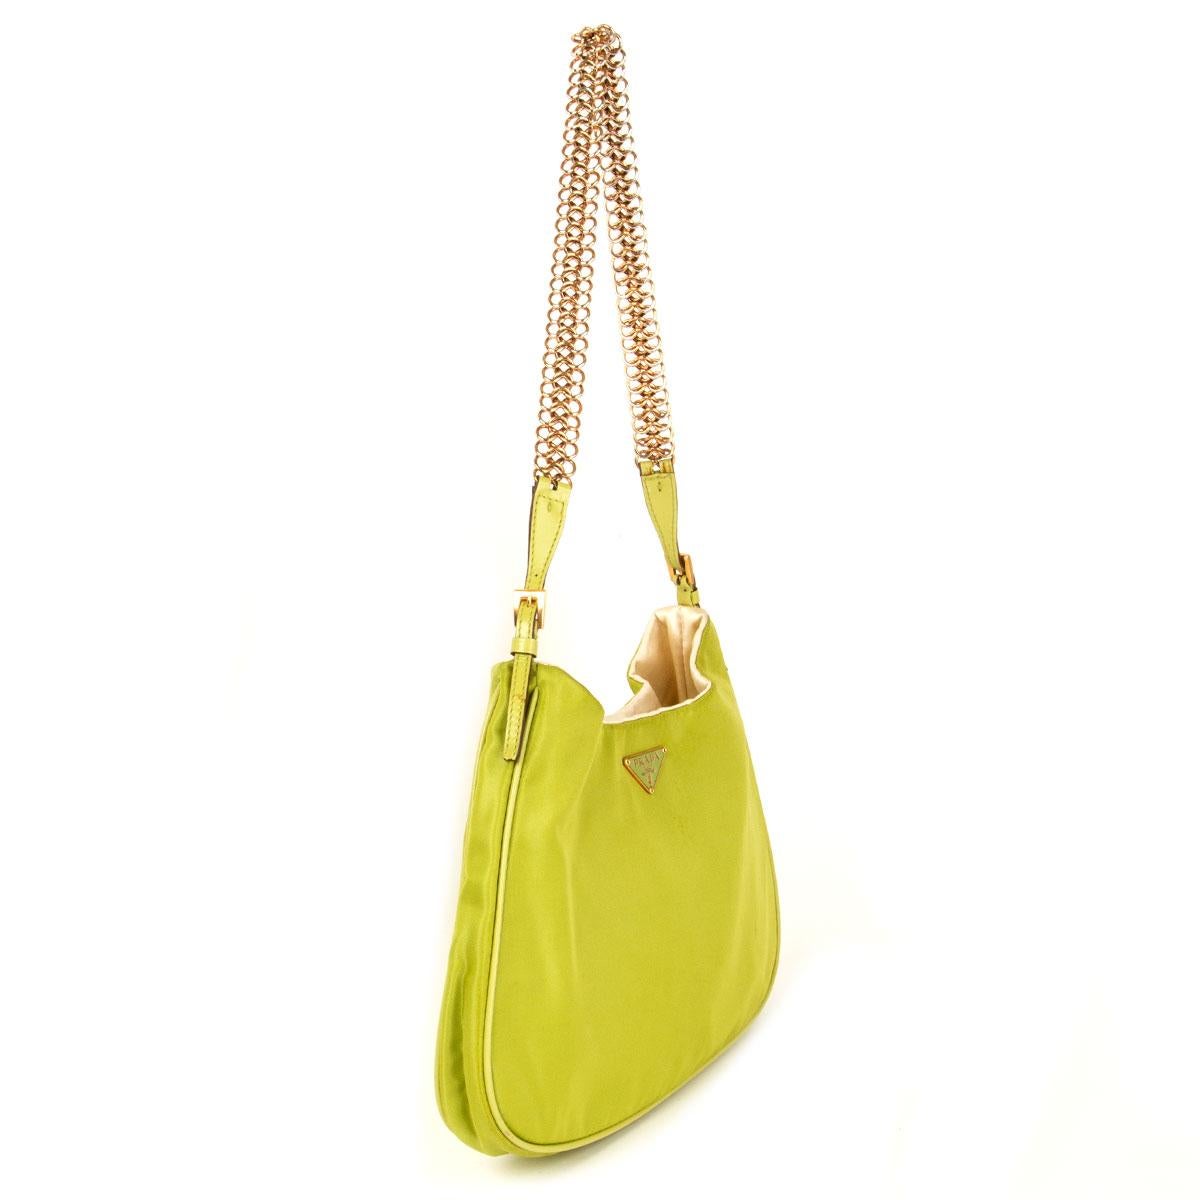 100% authentic Prada iconic mini shoulder bag in lime green nylon comes with a leather trim. Features a metal logo in gold and lime, adjustable golden chain strap with slight sign of discoloration. Lined in champagne color fabric with 3 tiny pink